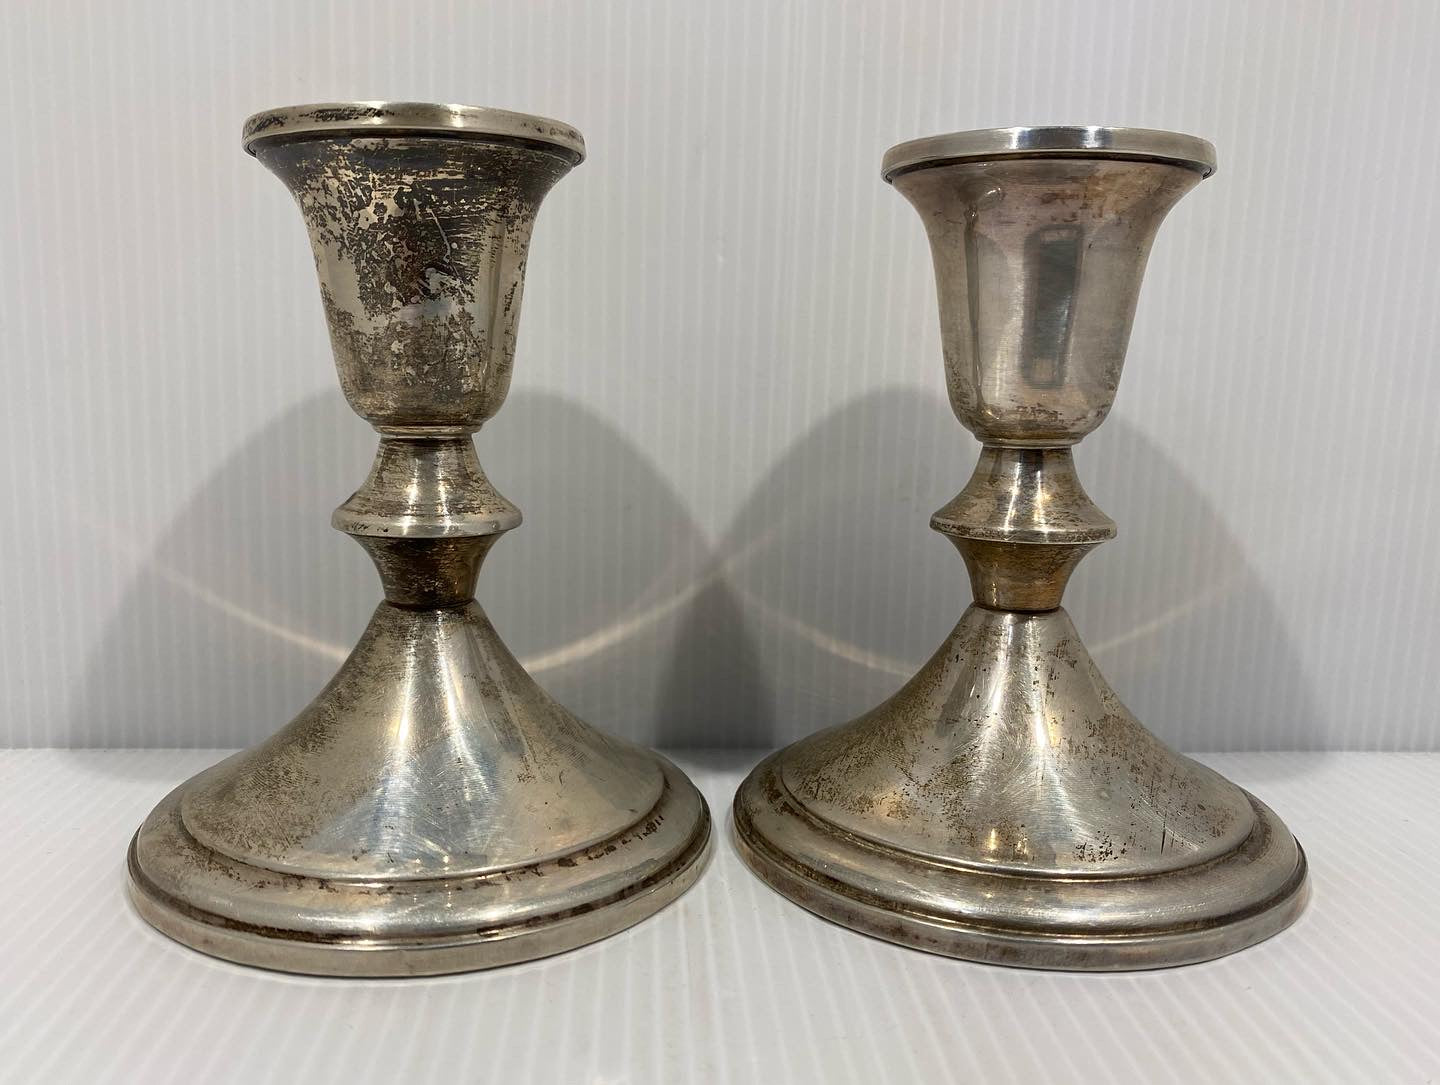 Sterling silver molded candlesticks by Towle in mid-century modern style